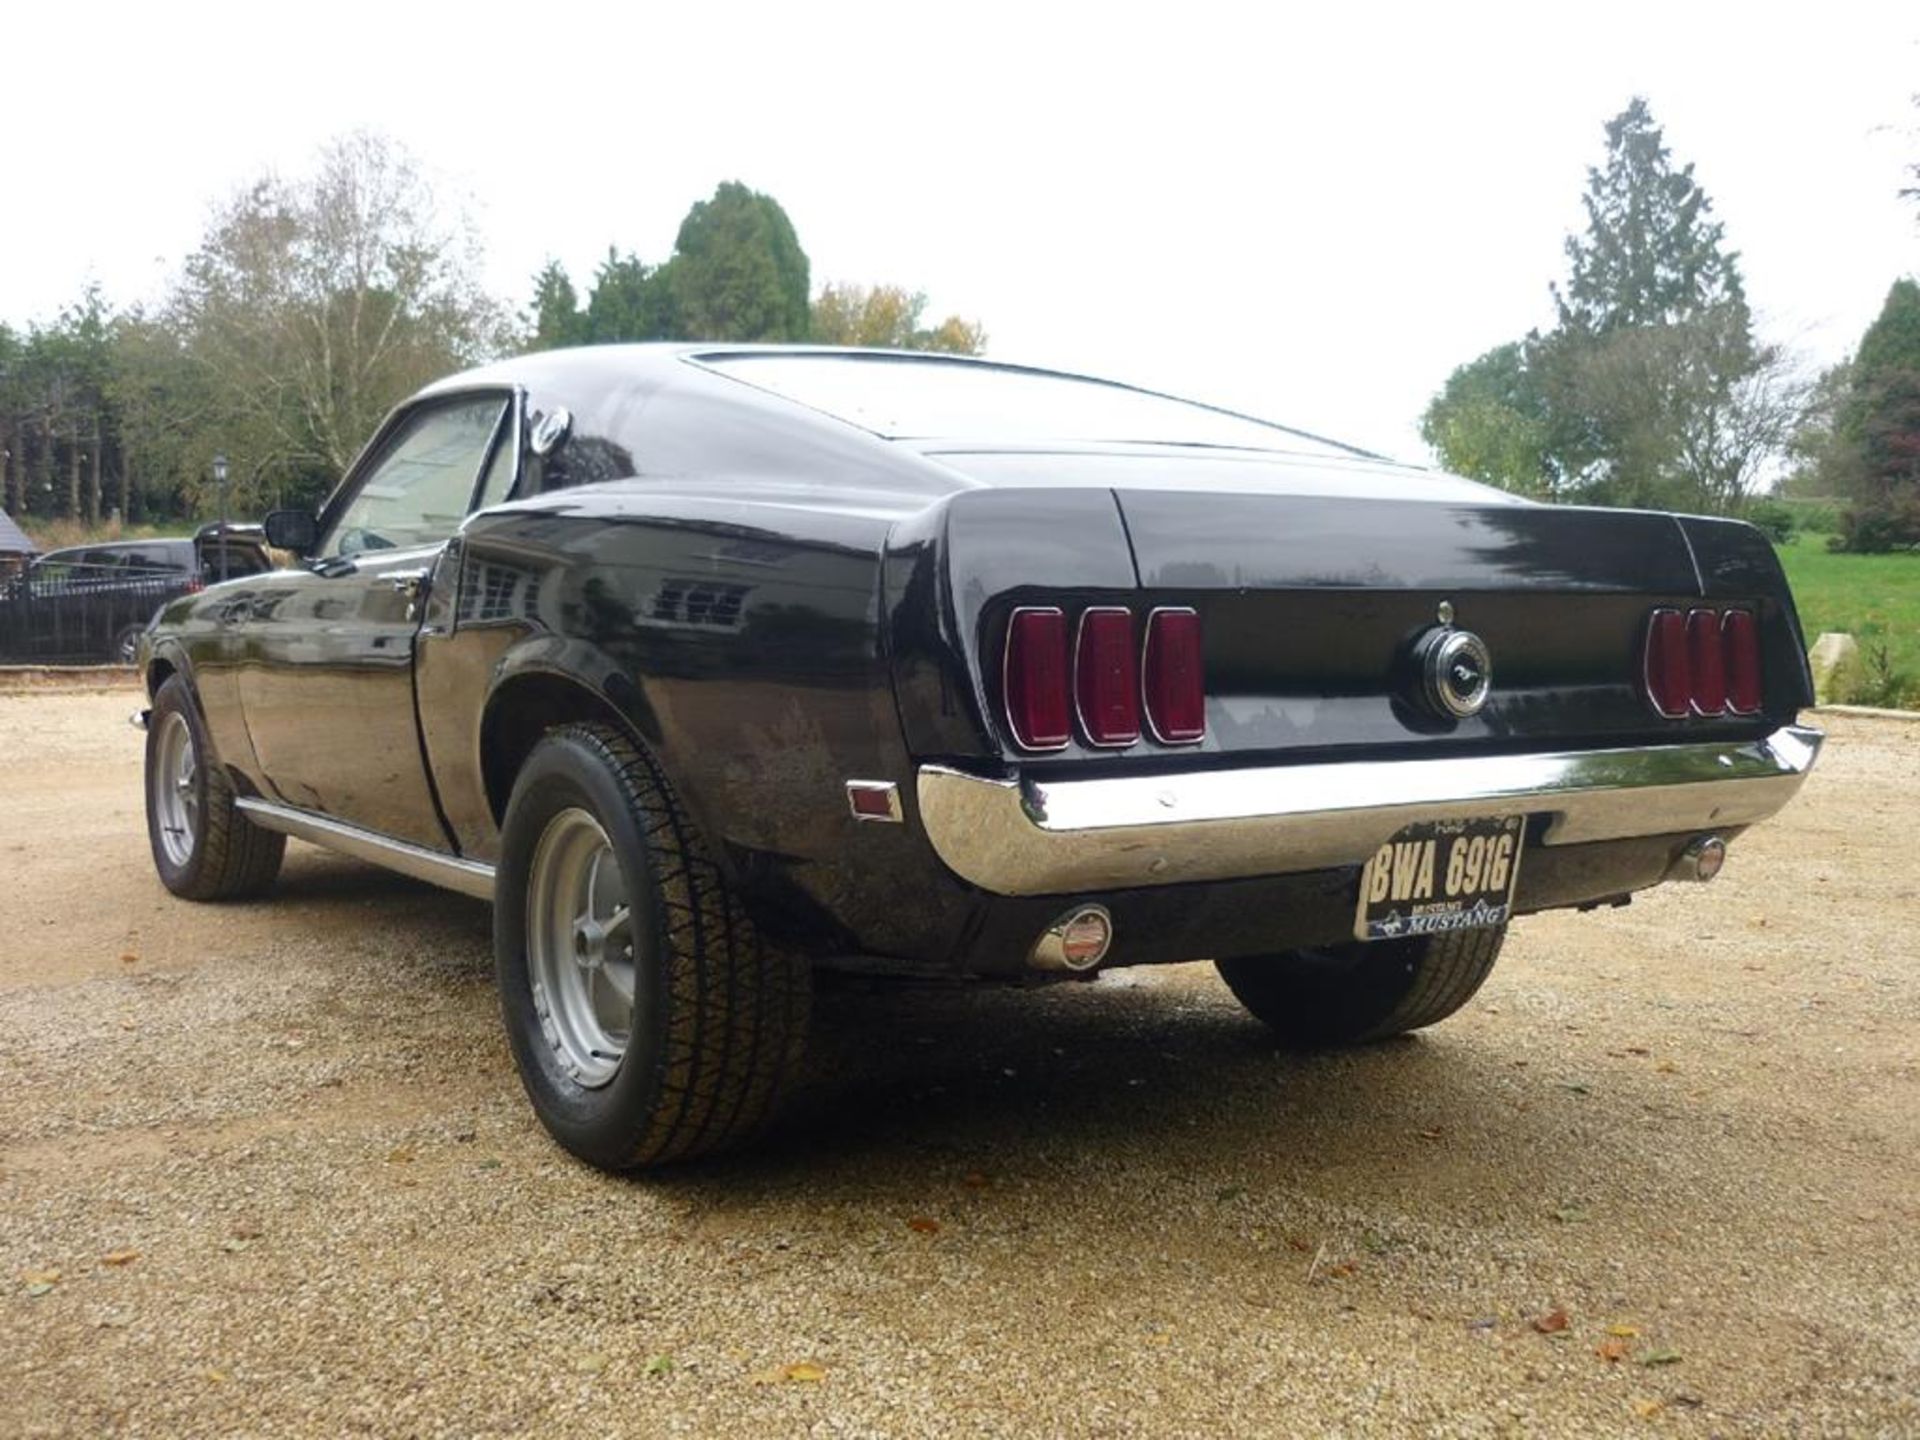 A 1969 Ford Mustang Fastback 351, registration number BWA 691G, chassis number 9T02H185415, black - Image 2 of 6